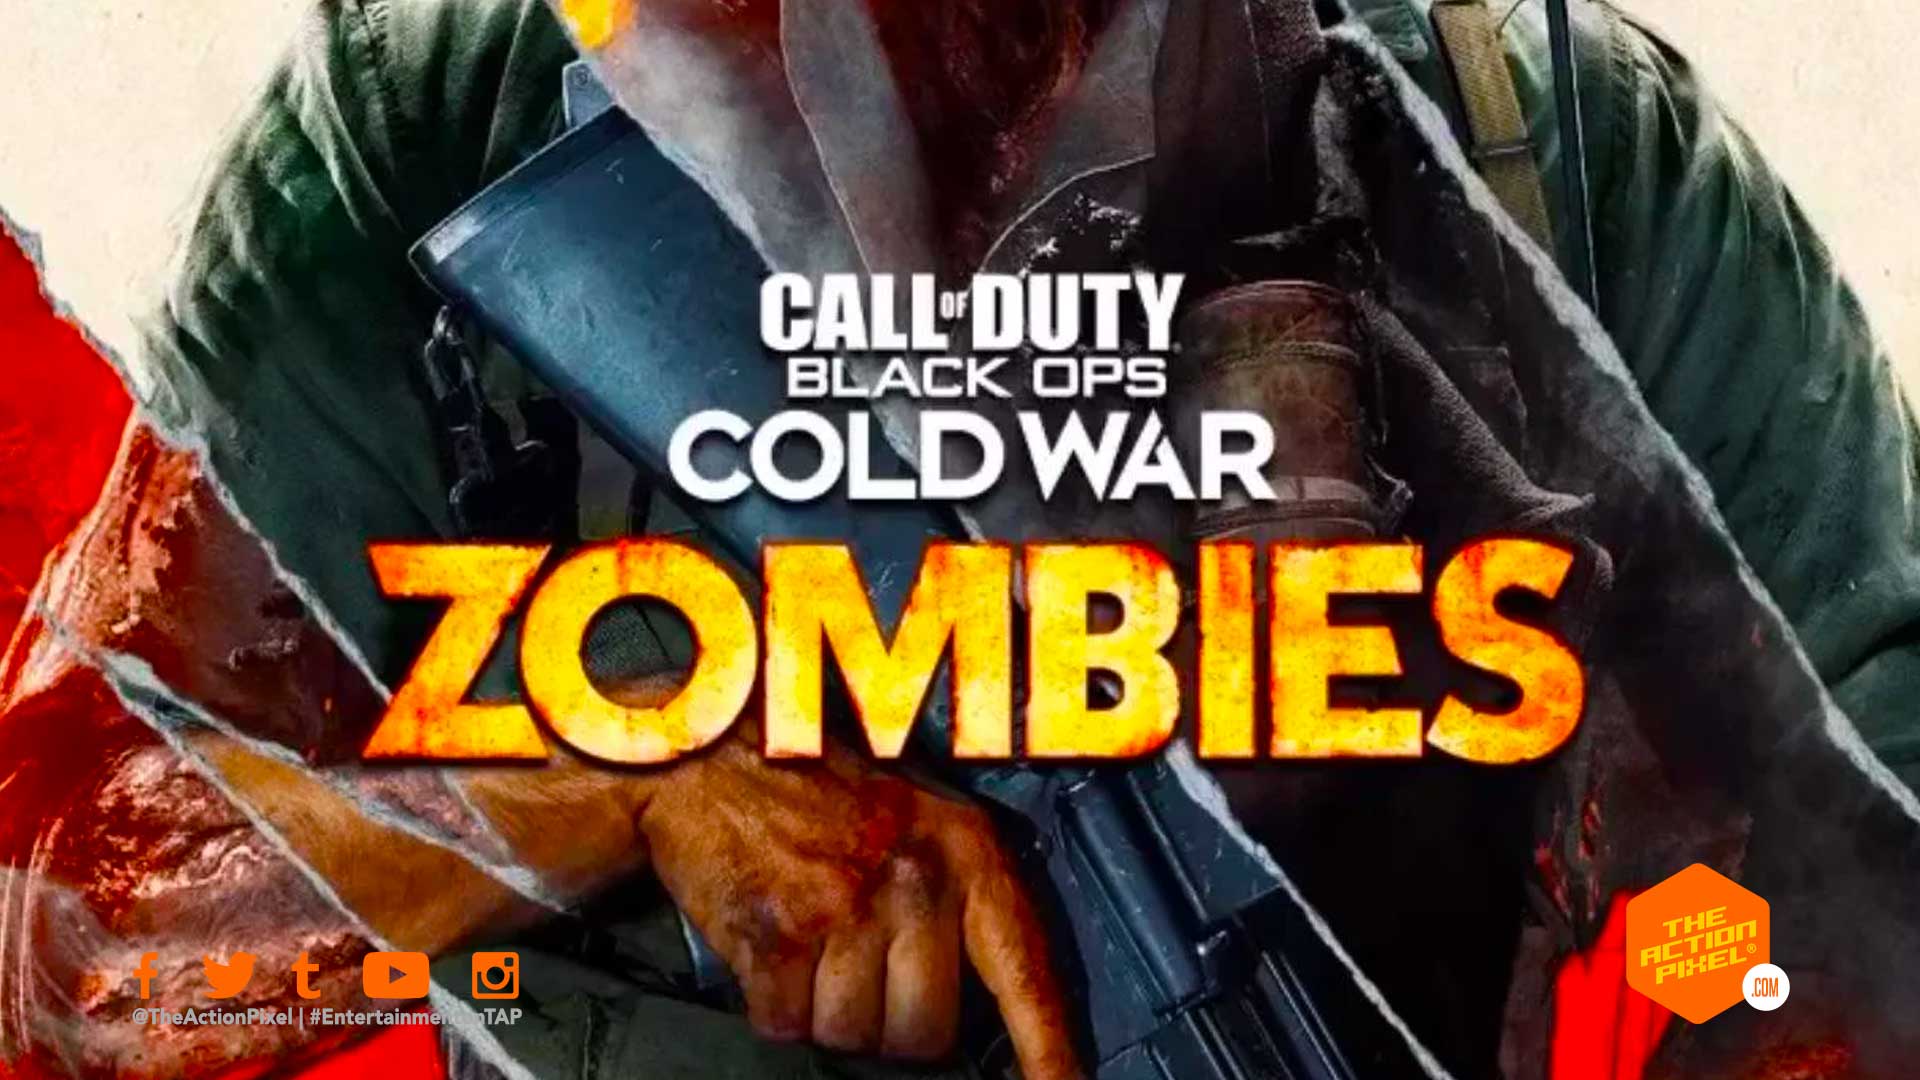 Call Of Duty: Black Ops Cold War” peels away the last meager flecks of humanity to reveal the return of Zombies